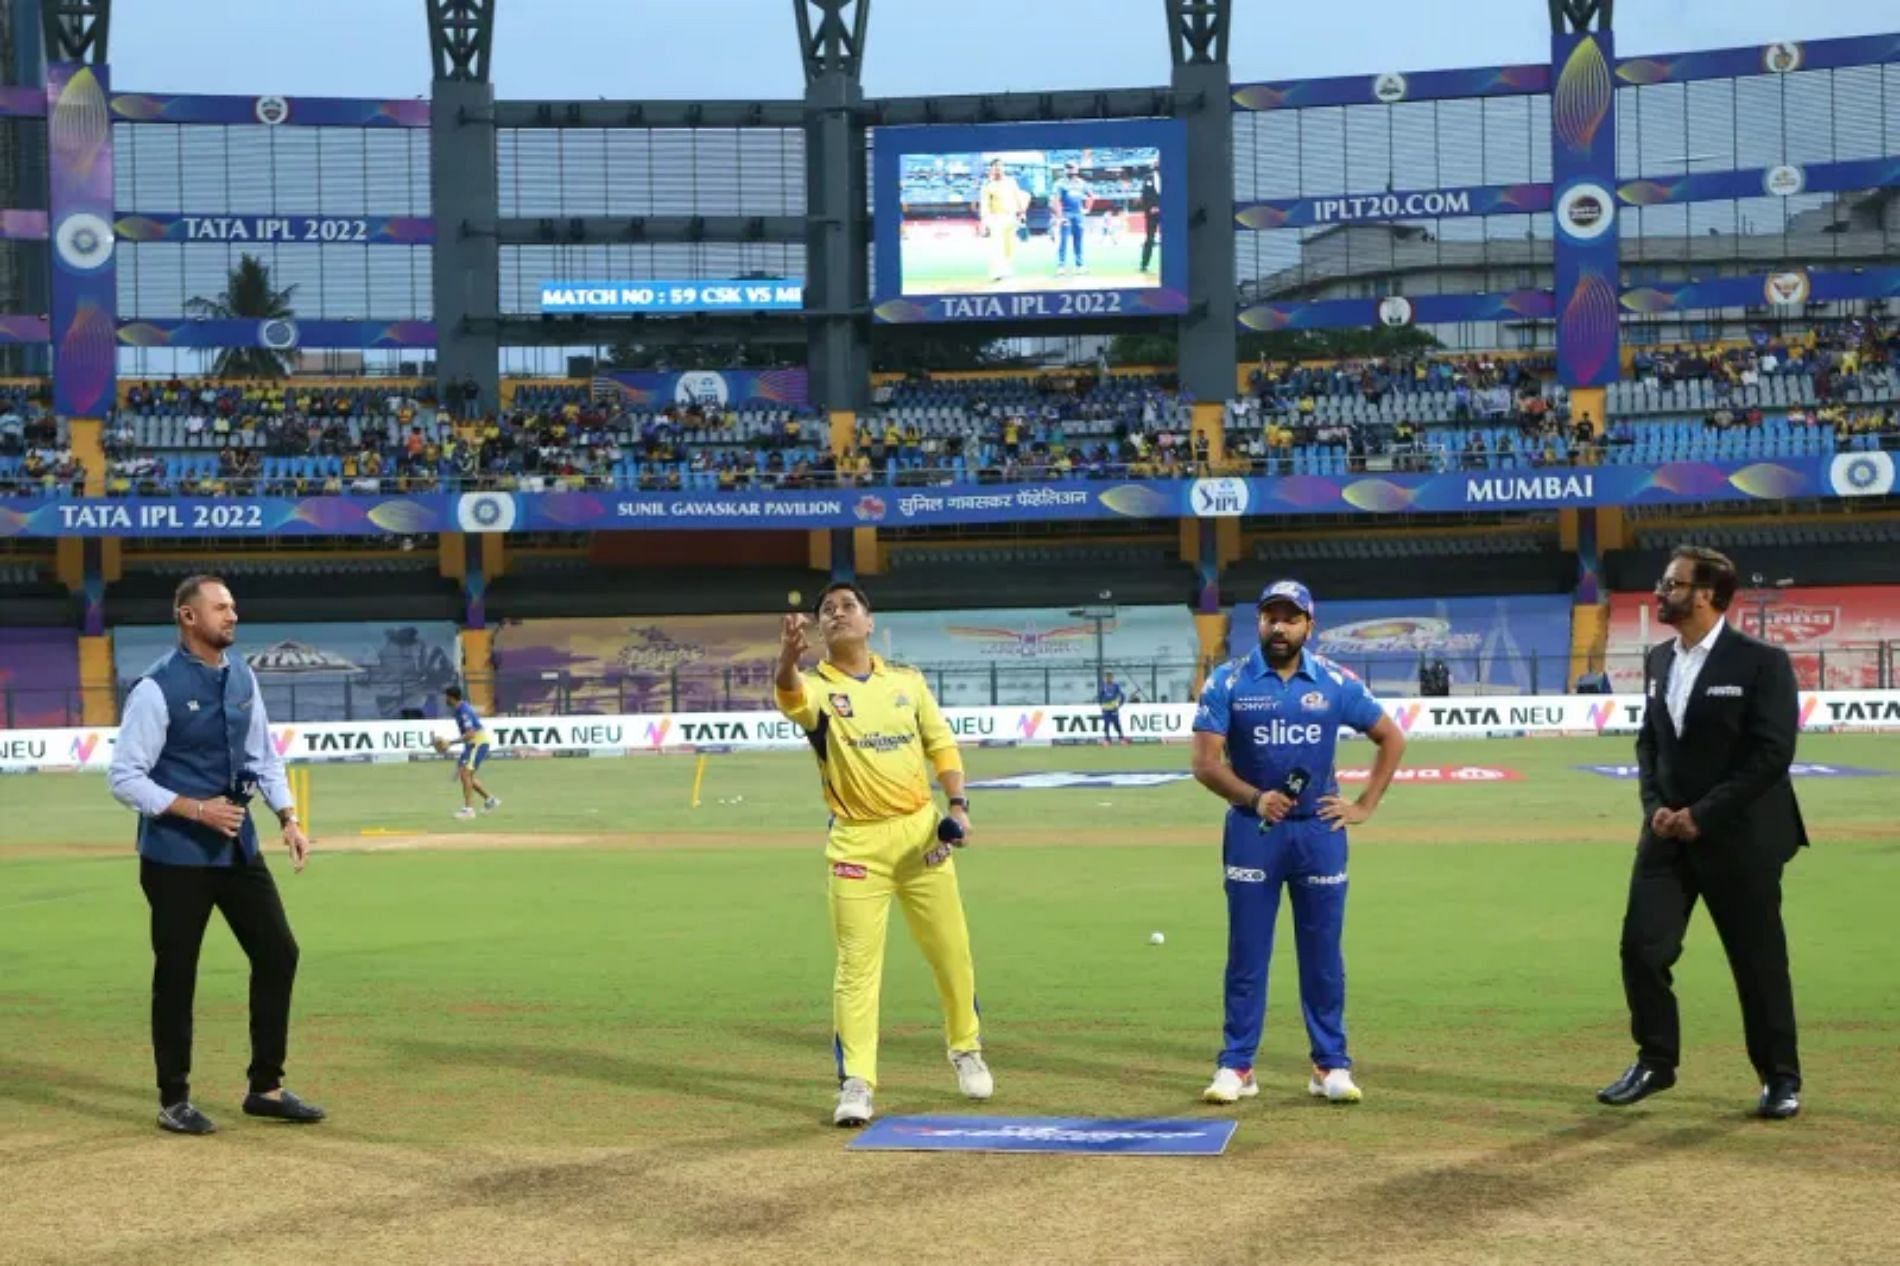 MI vs CSK, IPL 2023 Toss result and playing 11s for today's match